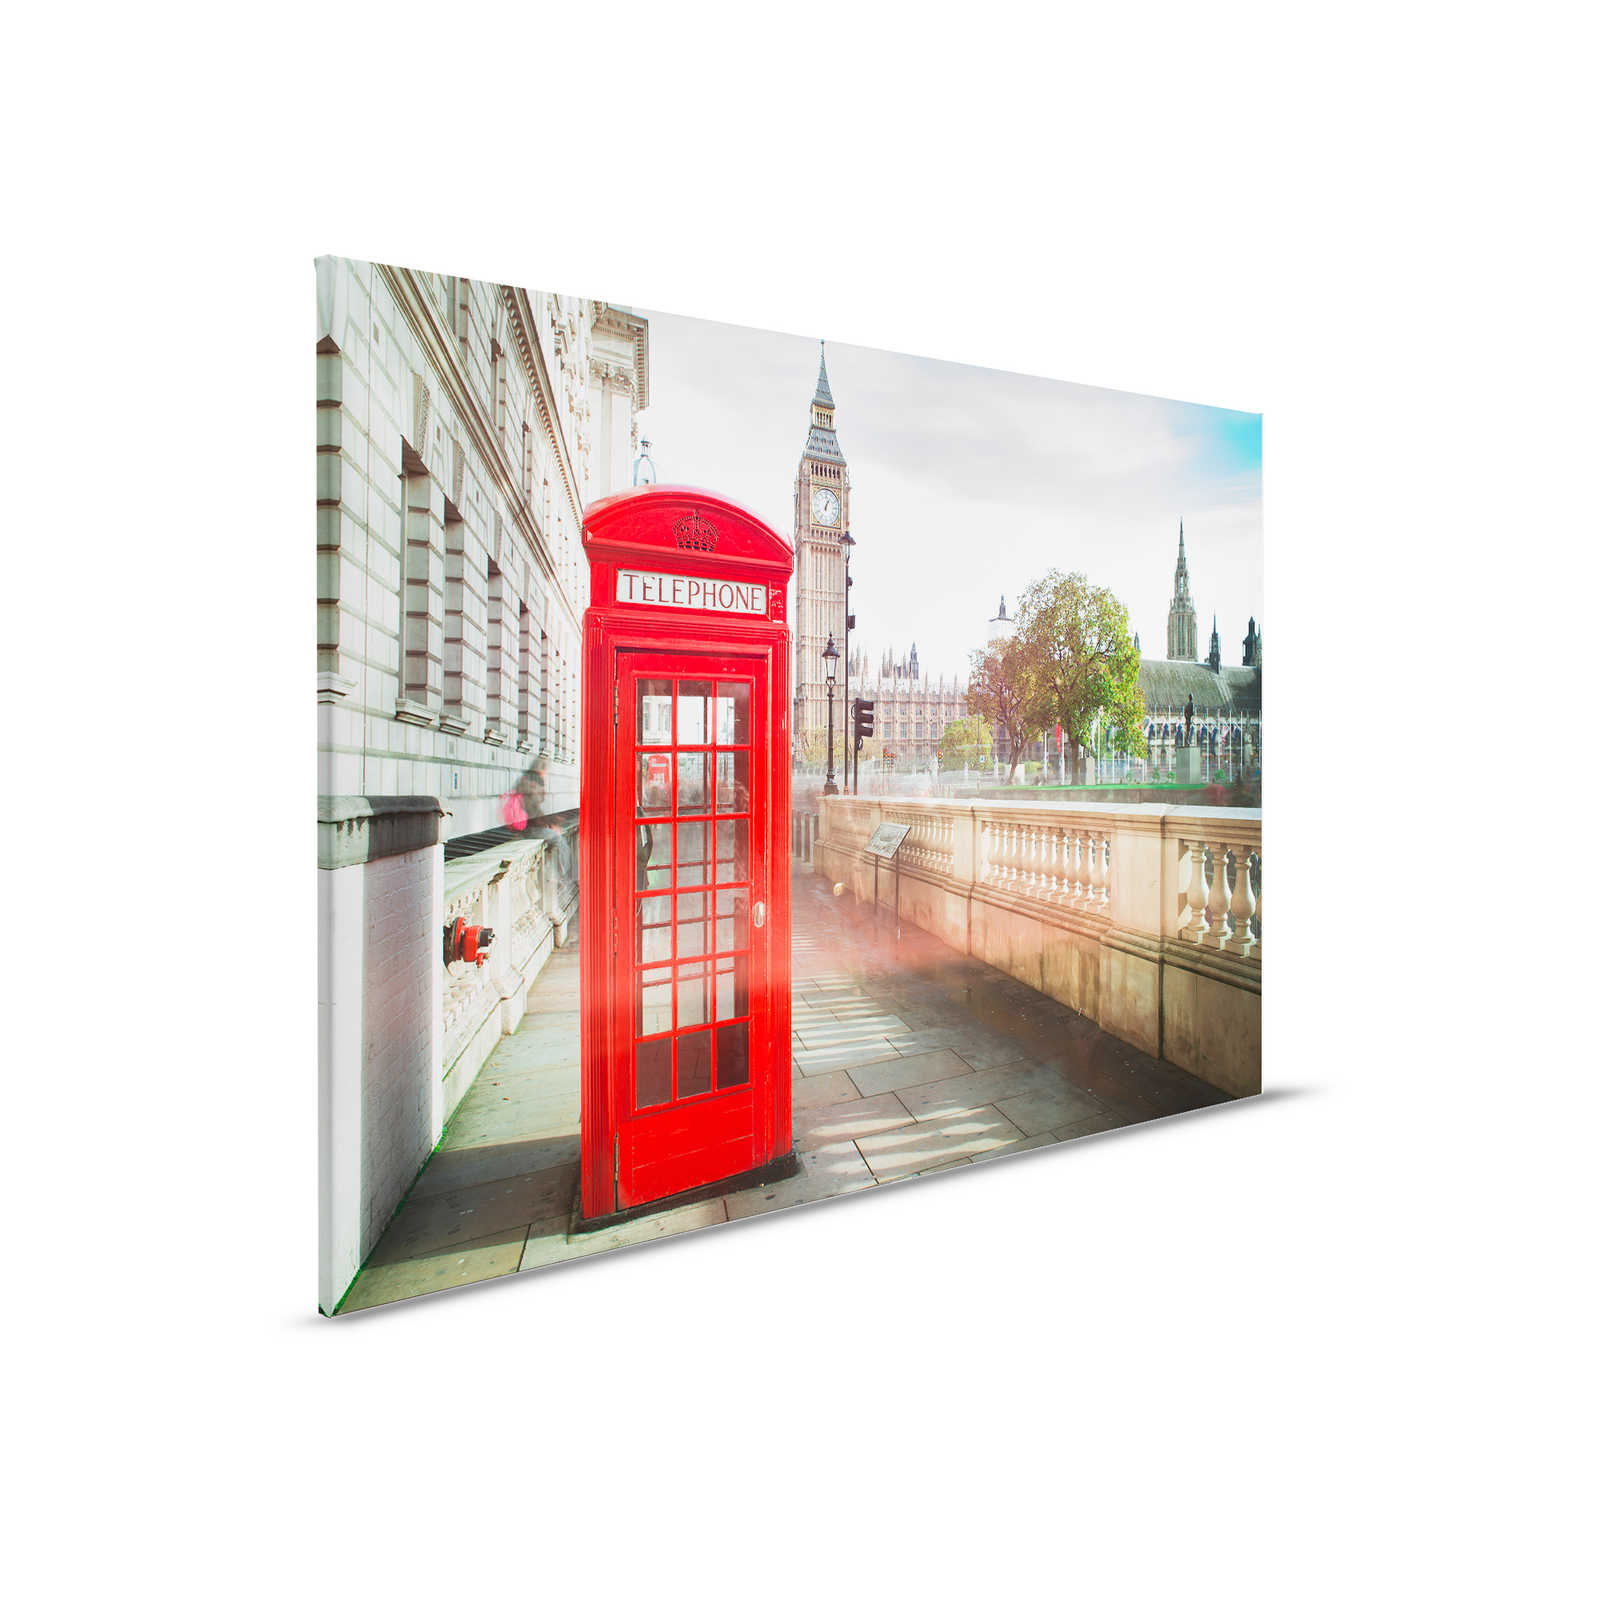         Canvas with red telephone box in London - 0.90 m x 0.60 m
    